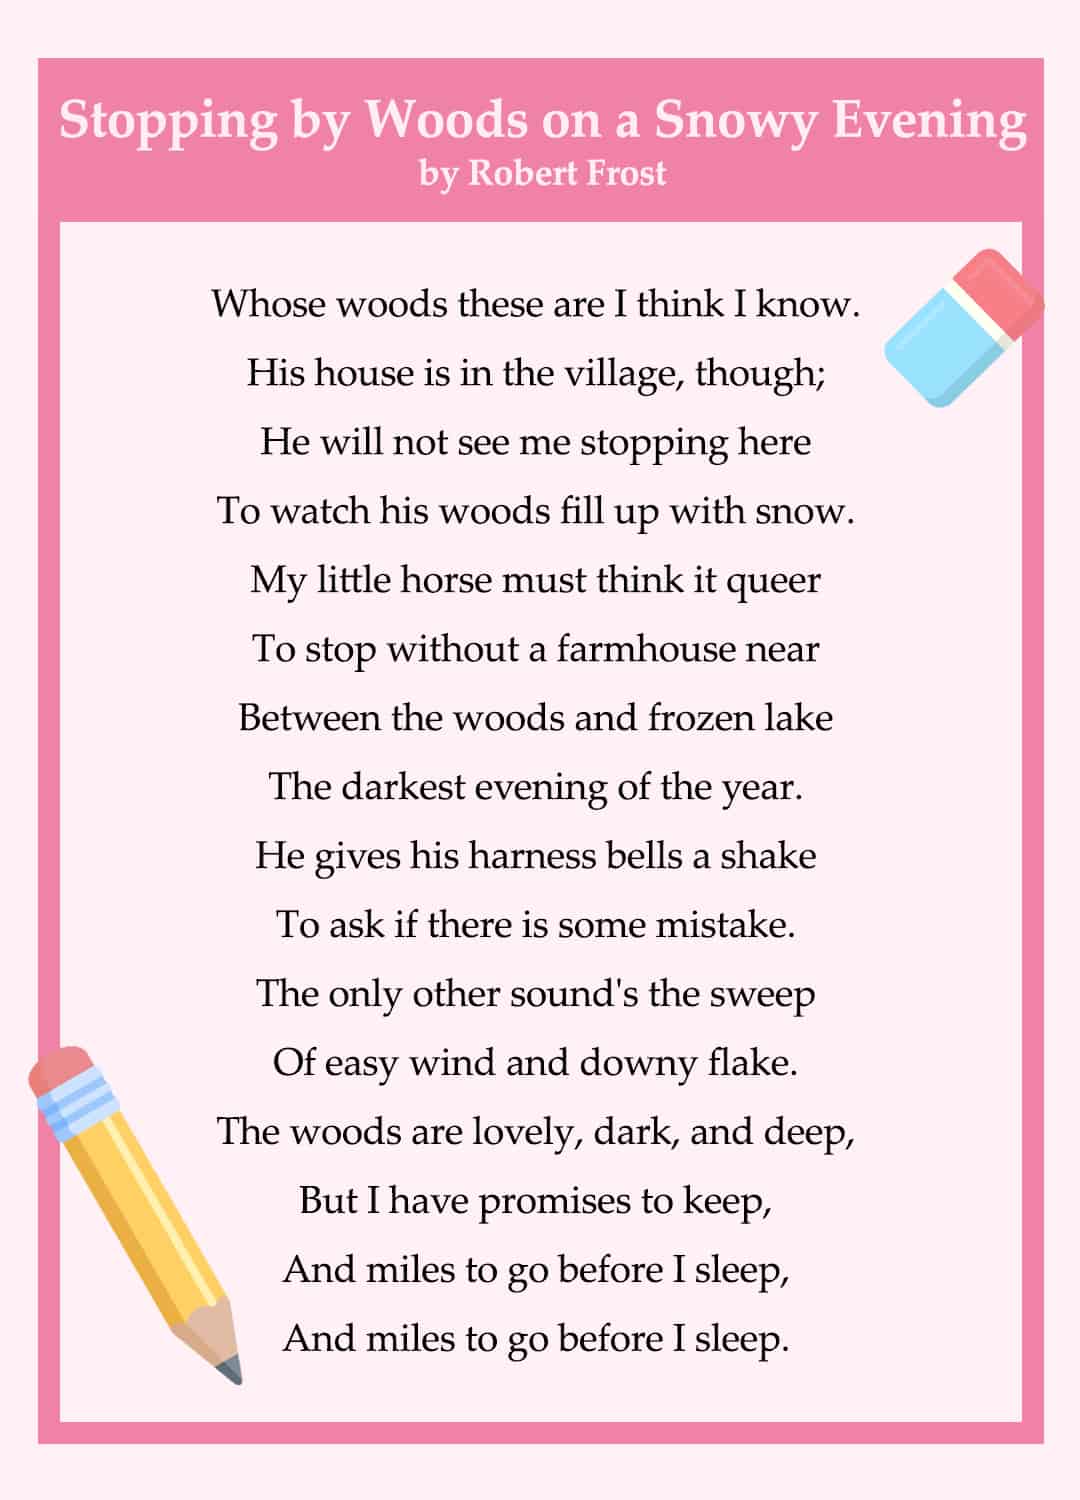 stopping by the woods on a snowy evening by Robert Frost